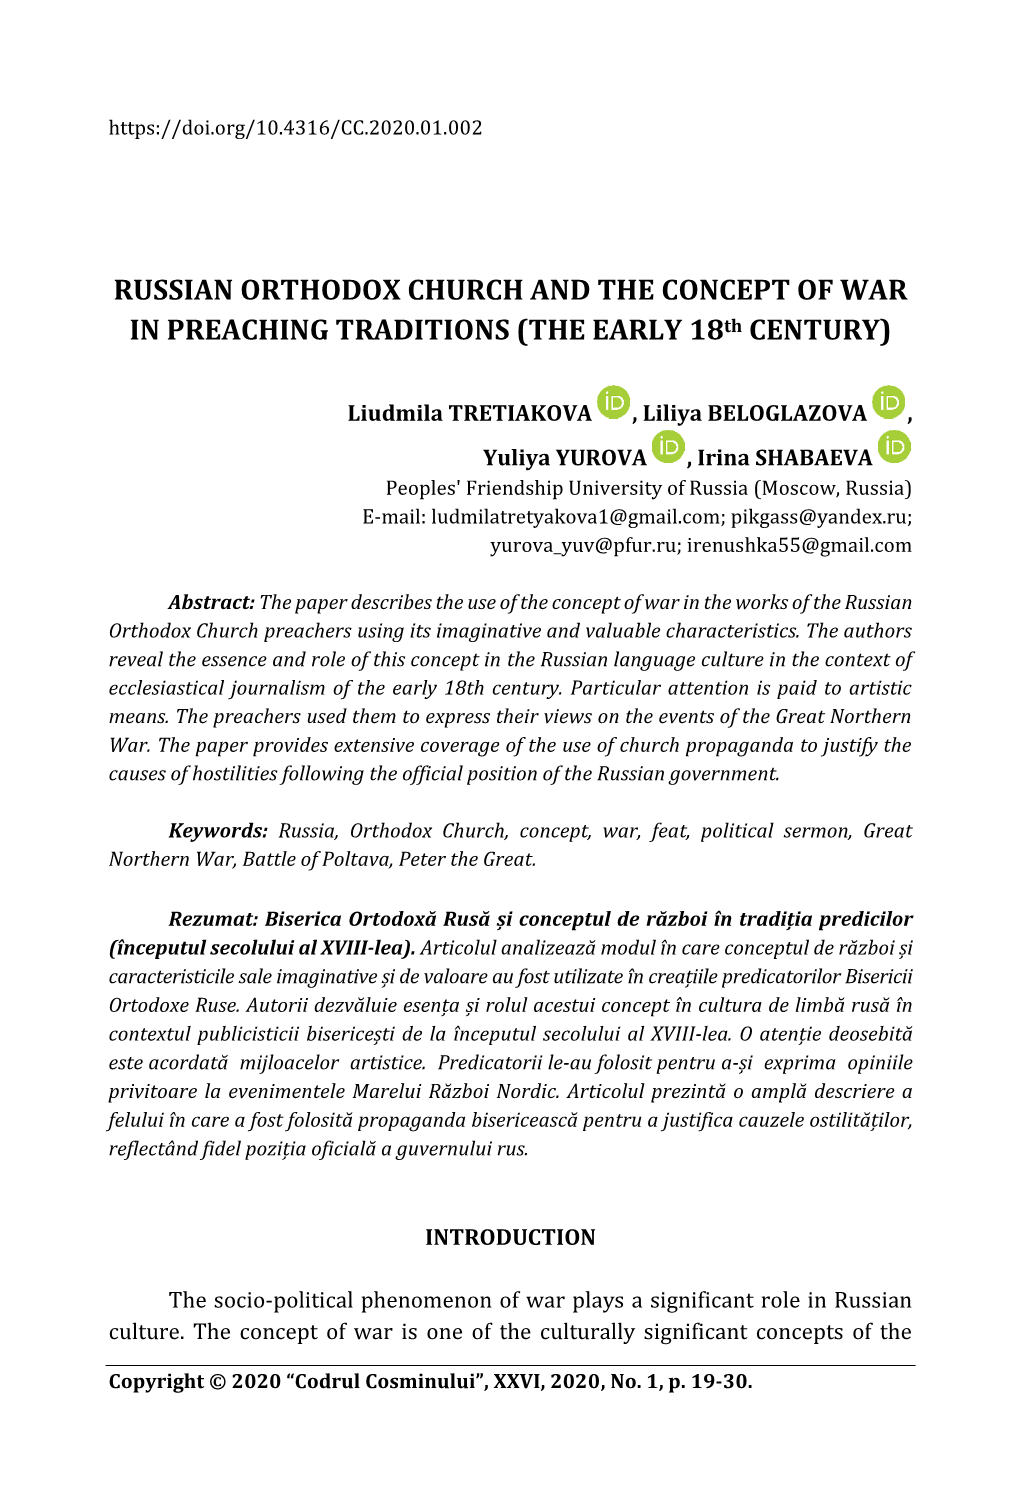 RUSSIAN ORTHODOX CHURCH and the CONCEPT of WAR in PREACHING TRADITIONS (THE EARLY 18Th CENTURY)